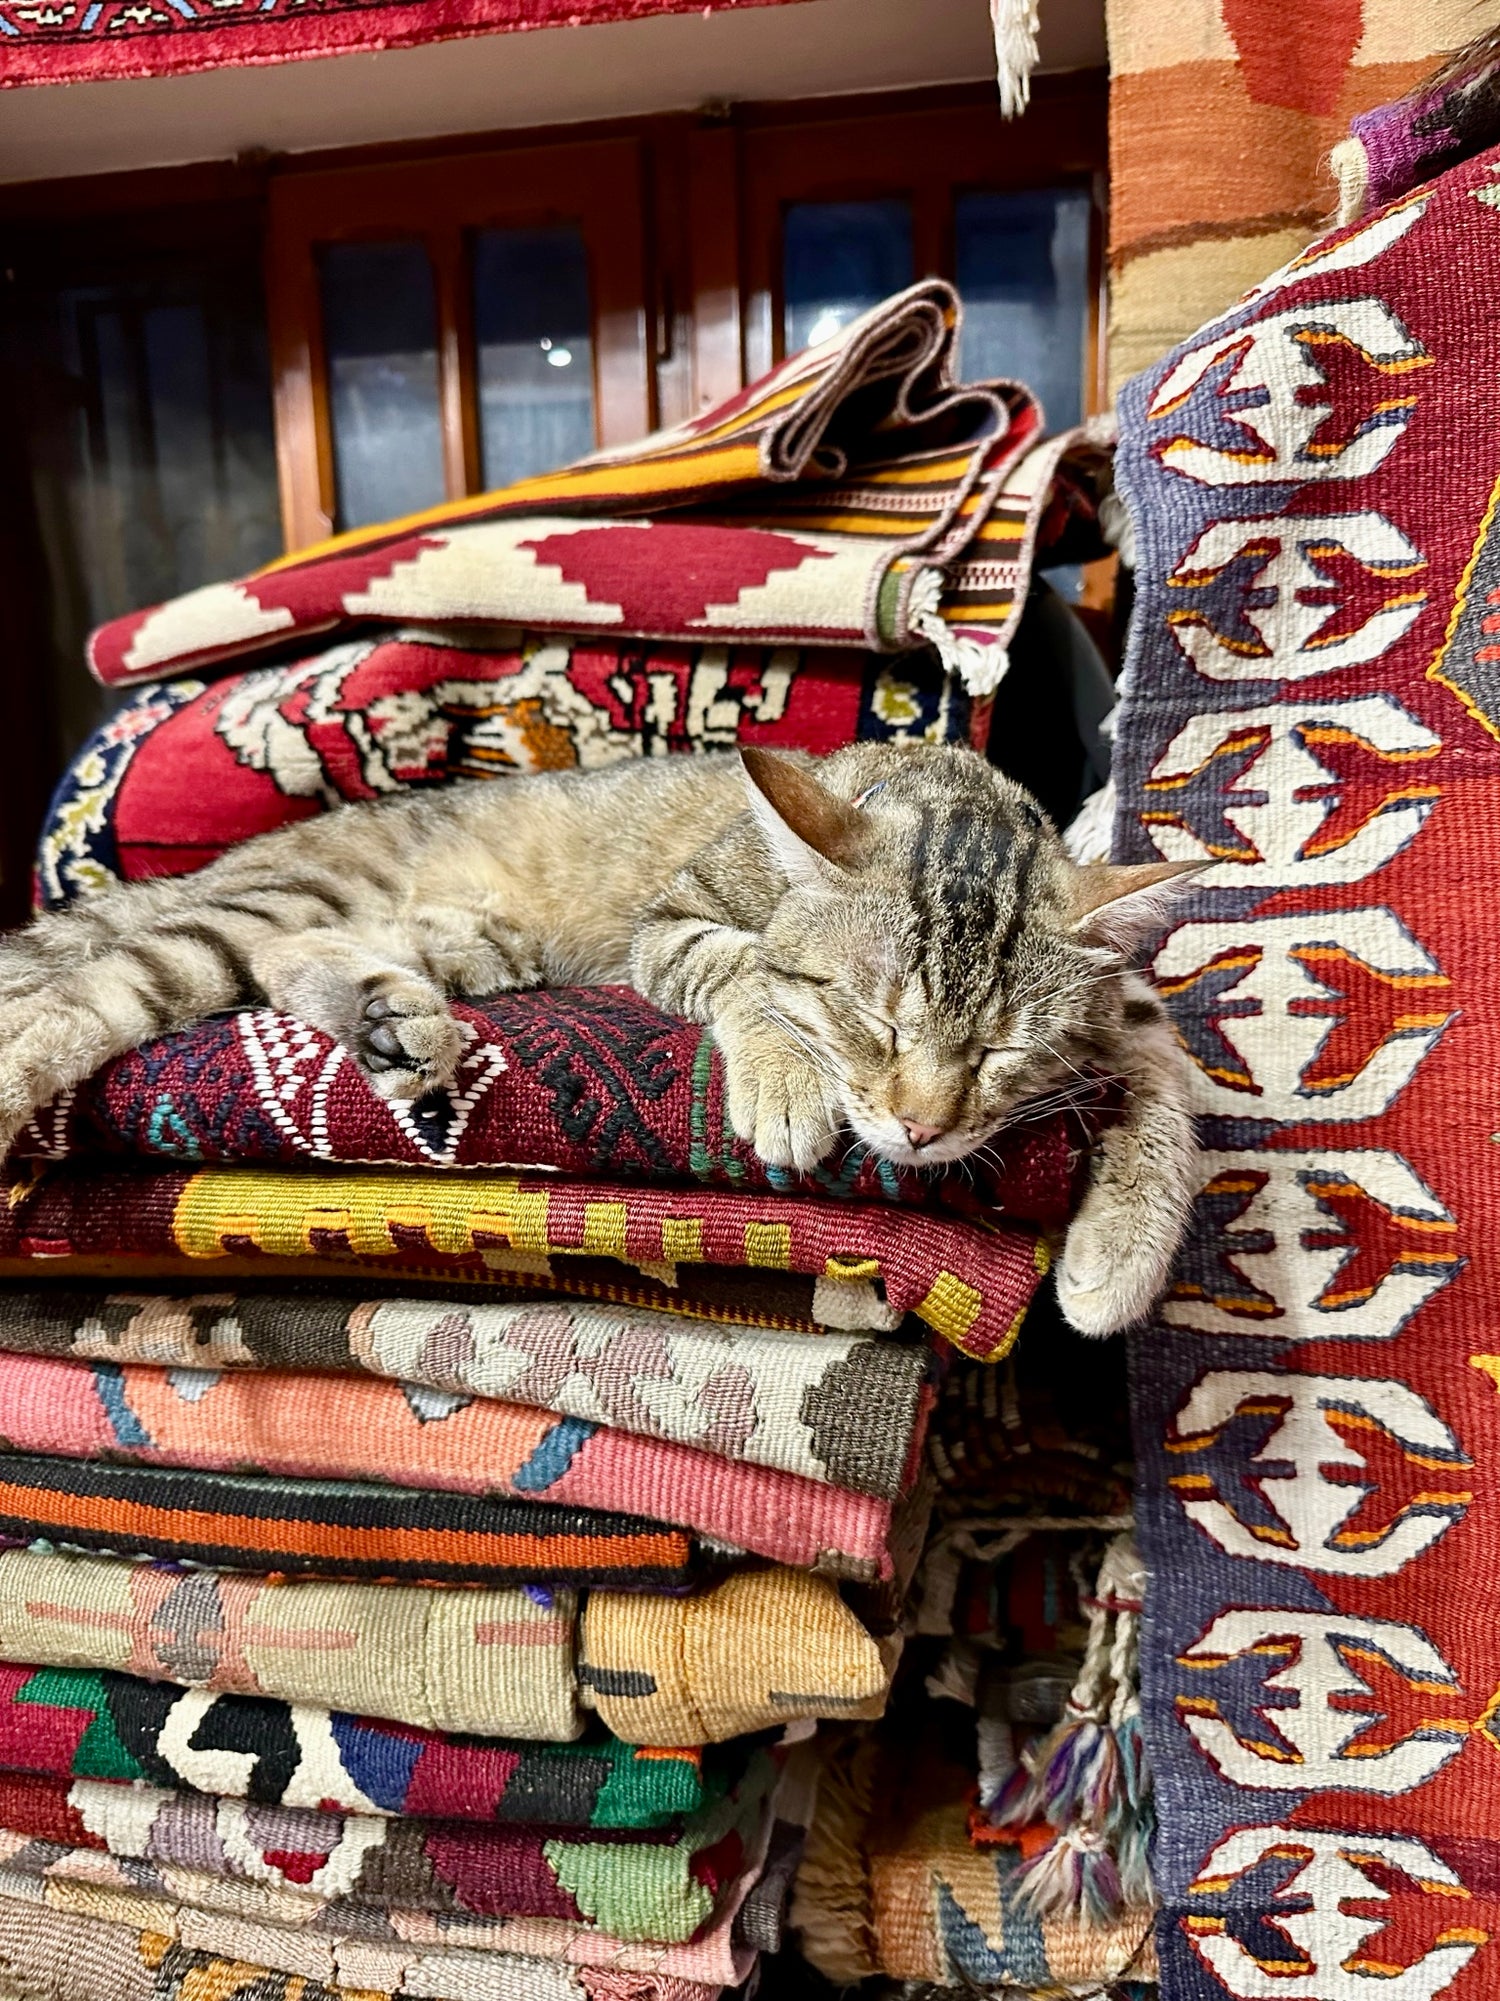 The Cats and Dogs of Turkey: Beloved Strays Finding Home Amidst Rich Heritage